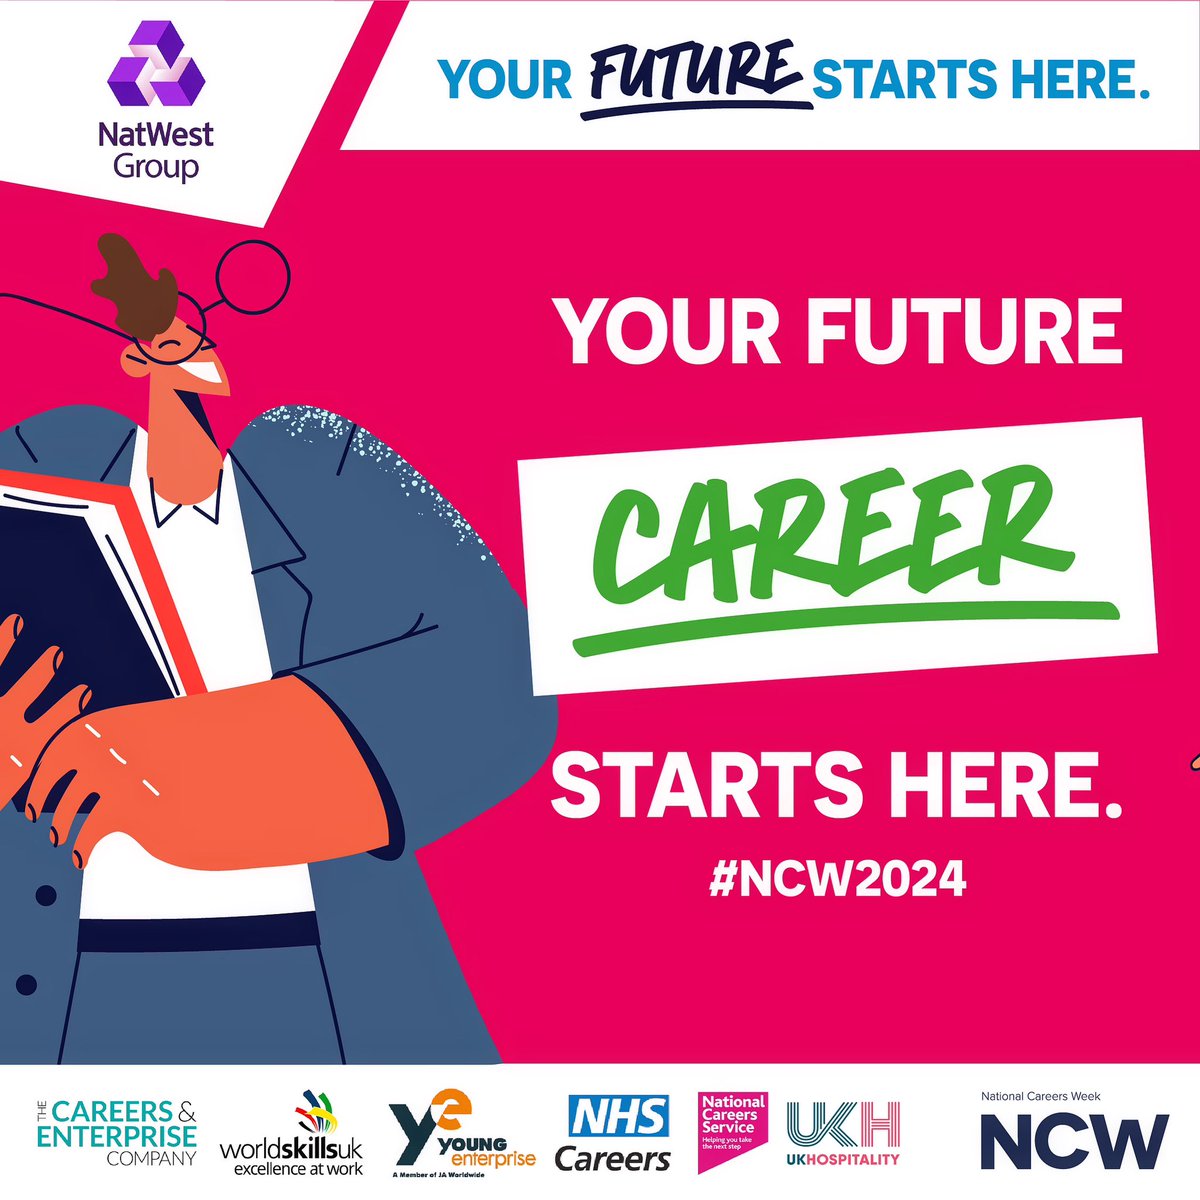 Celebrating National Careers Week - there has never been a bigger need for careers guidance to be promoted and celebrated in education. For further information visit nationalcareersweek.com

#NCW2024 #SLTchat #Careers #education #recruitment